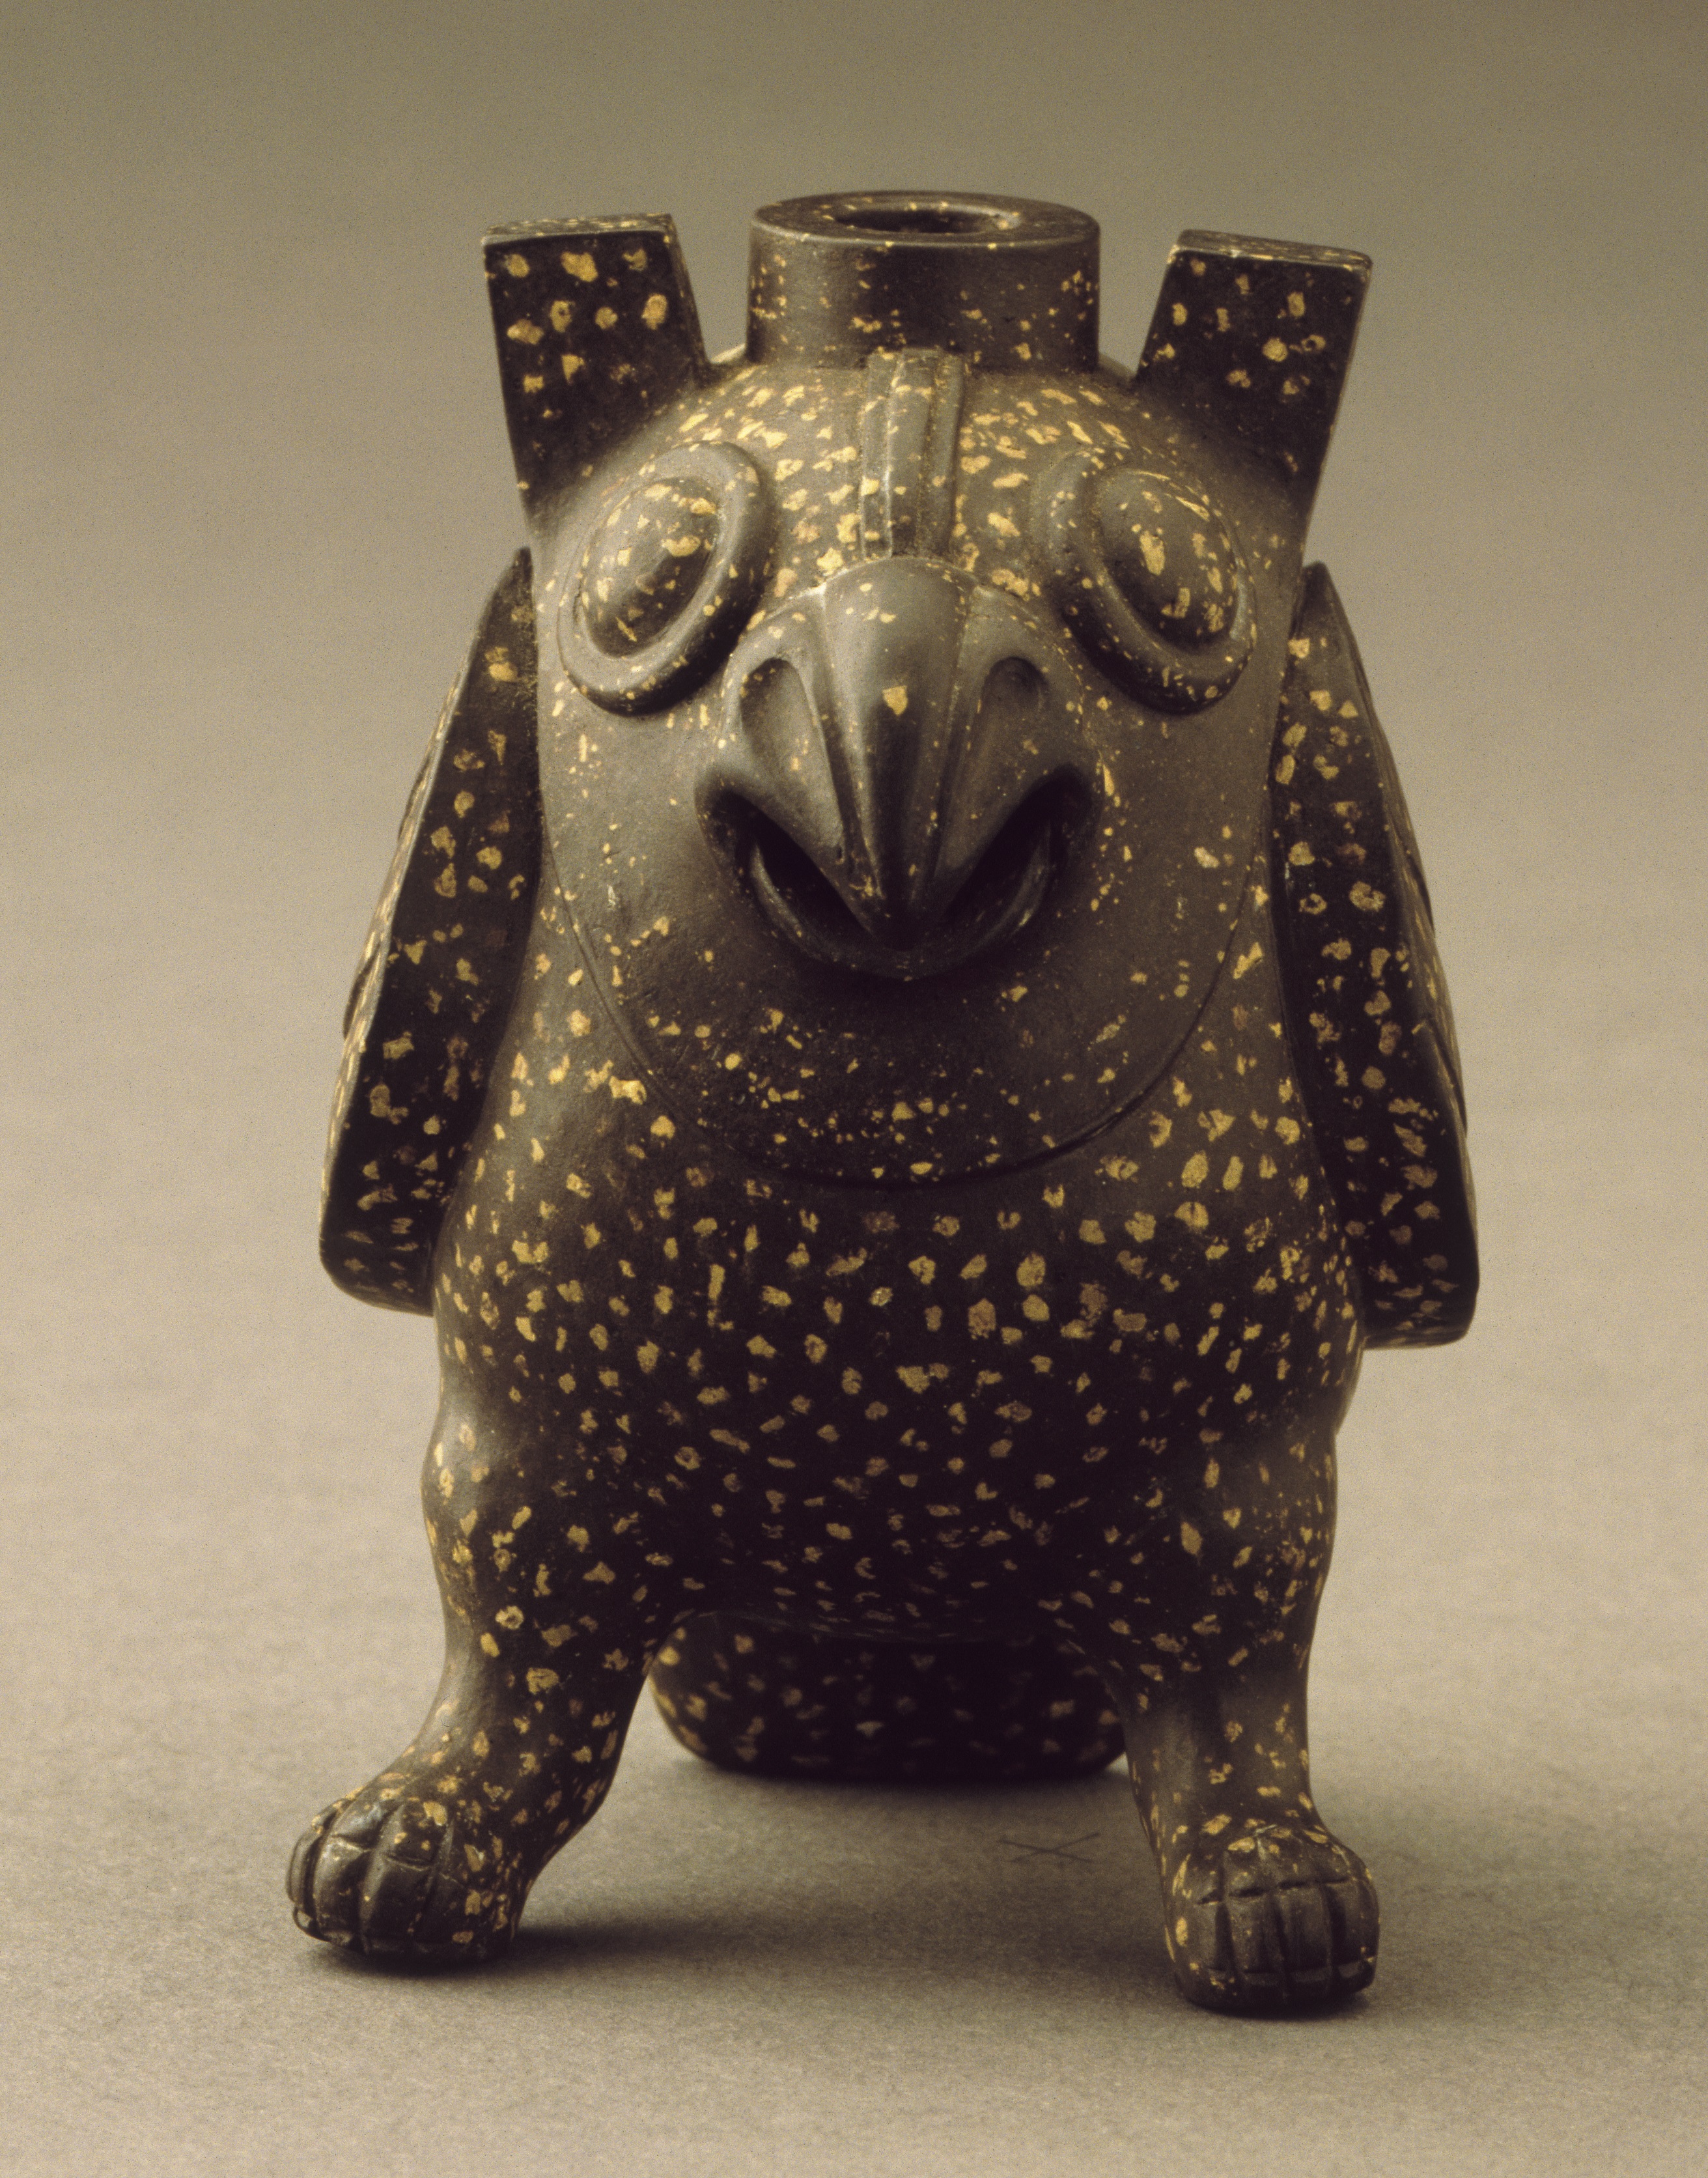 Water dropper in form of ancient bronze vessel